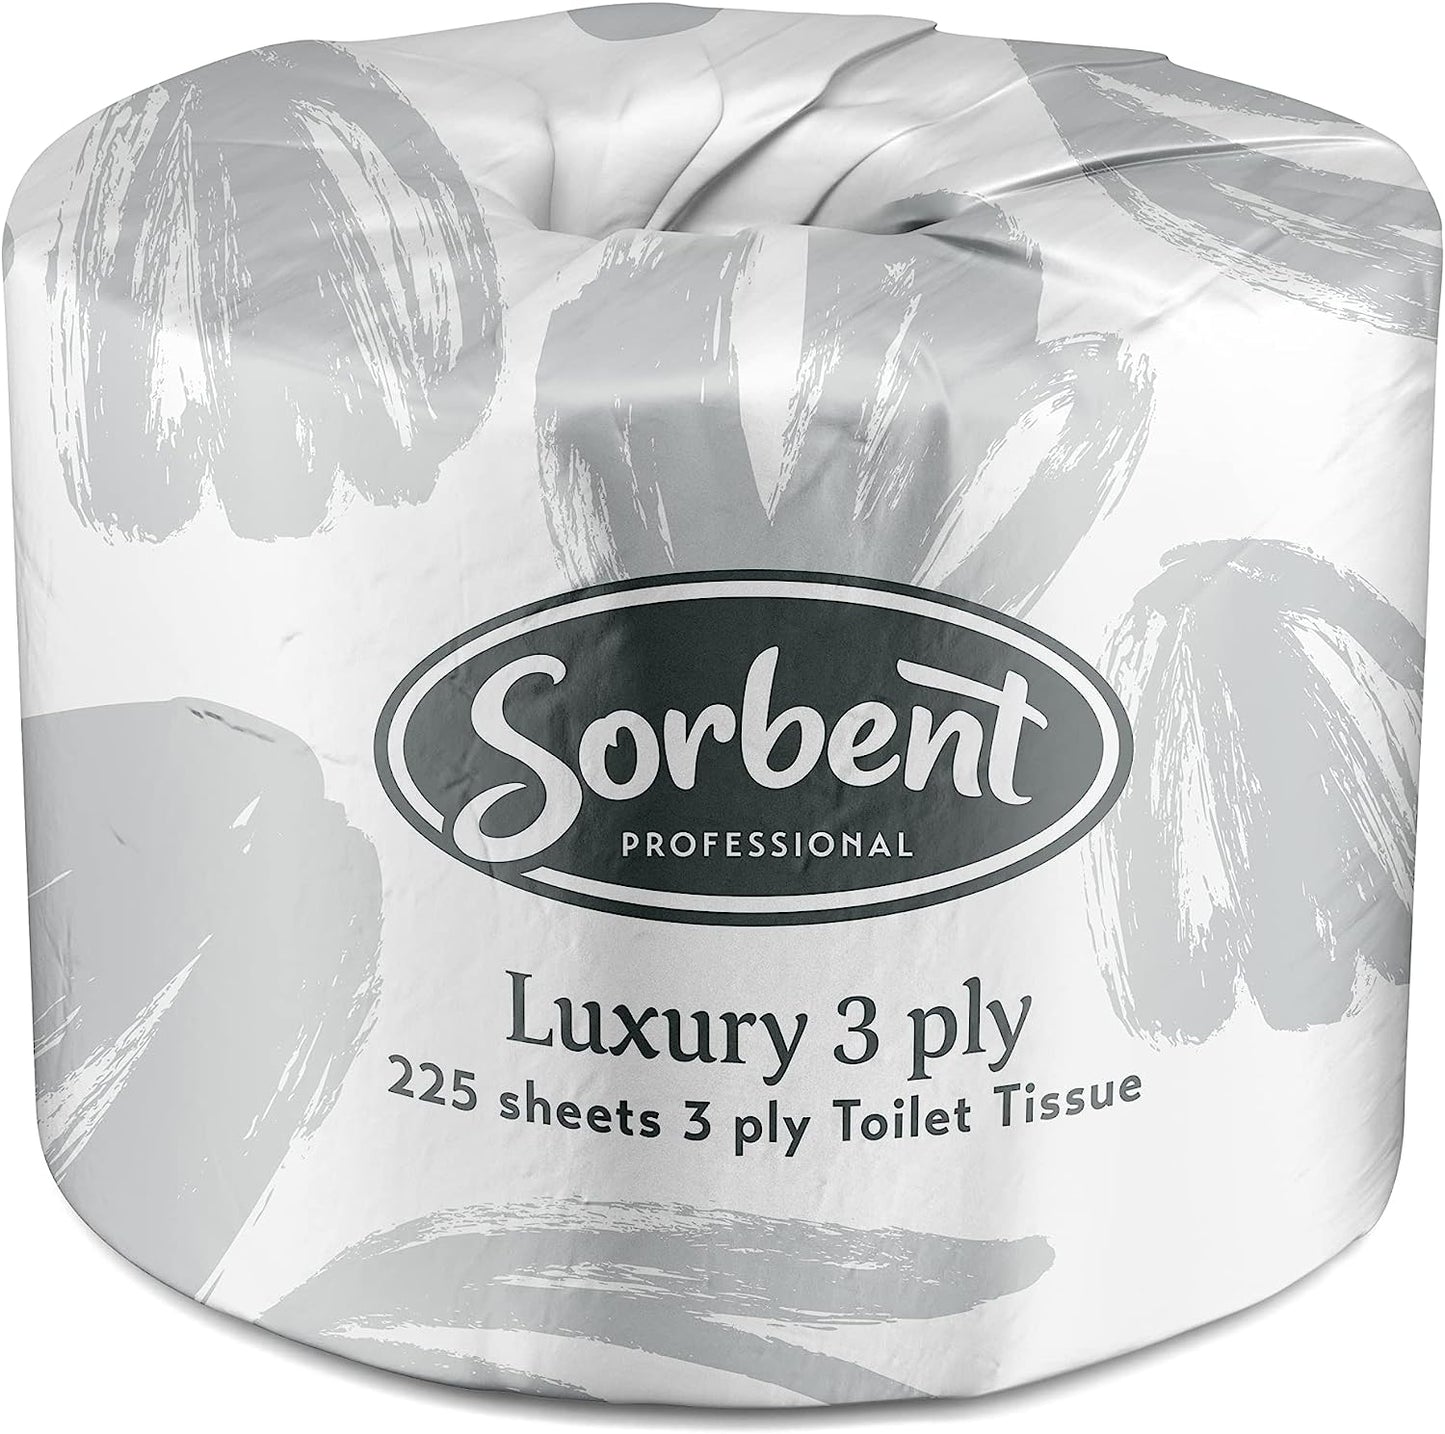 Sorbent Professional Luxury Toilet Tissues 3ply 225 sheets  48 count